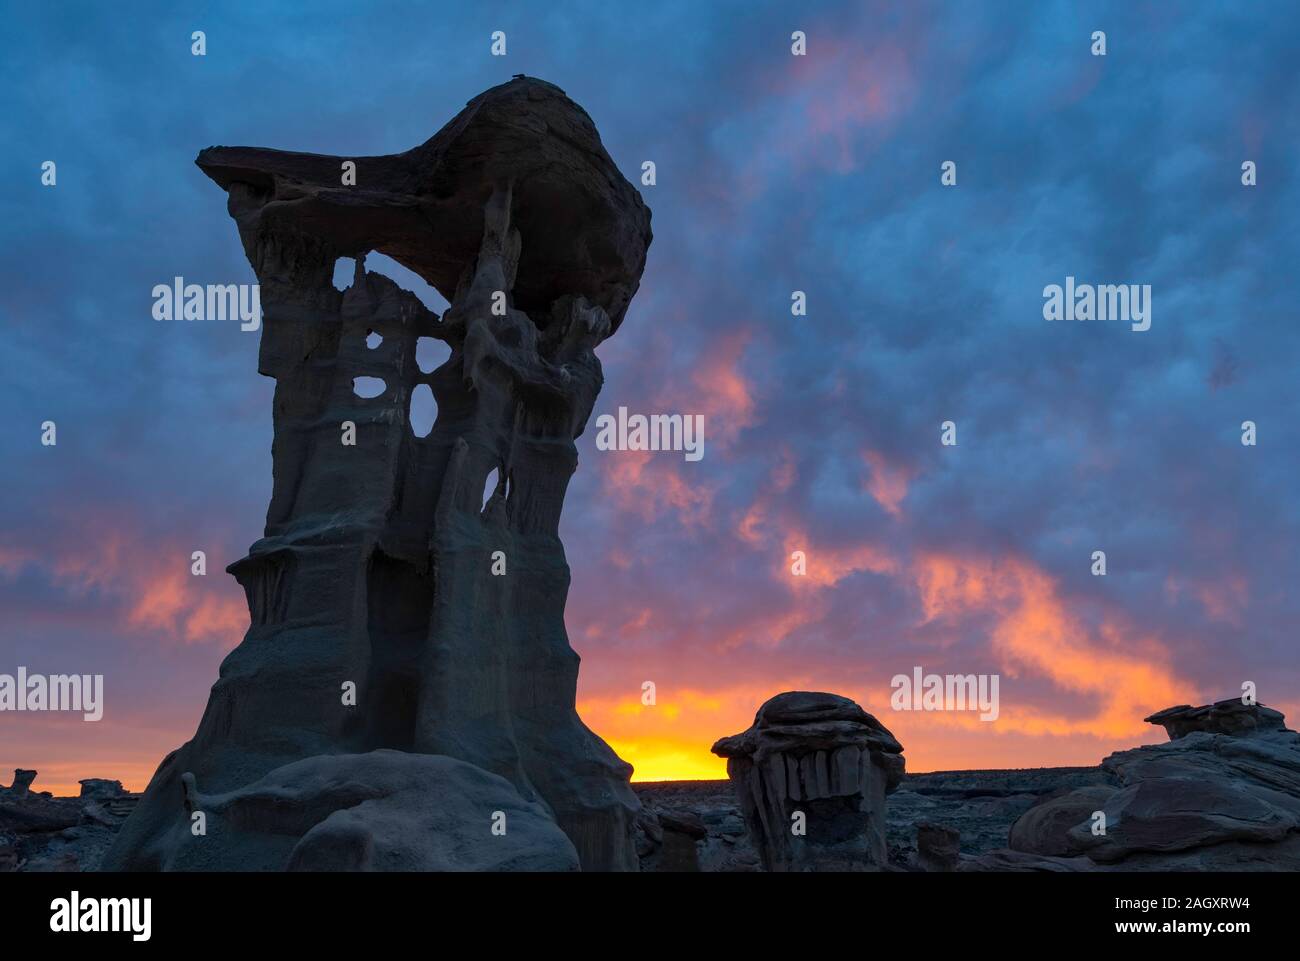 Alien Throne at sunset, Bisti Badlands, New Mexico Stock Photo